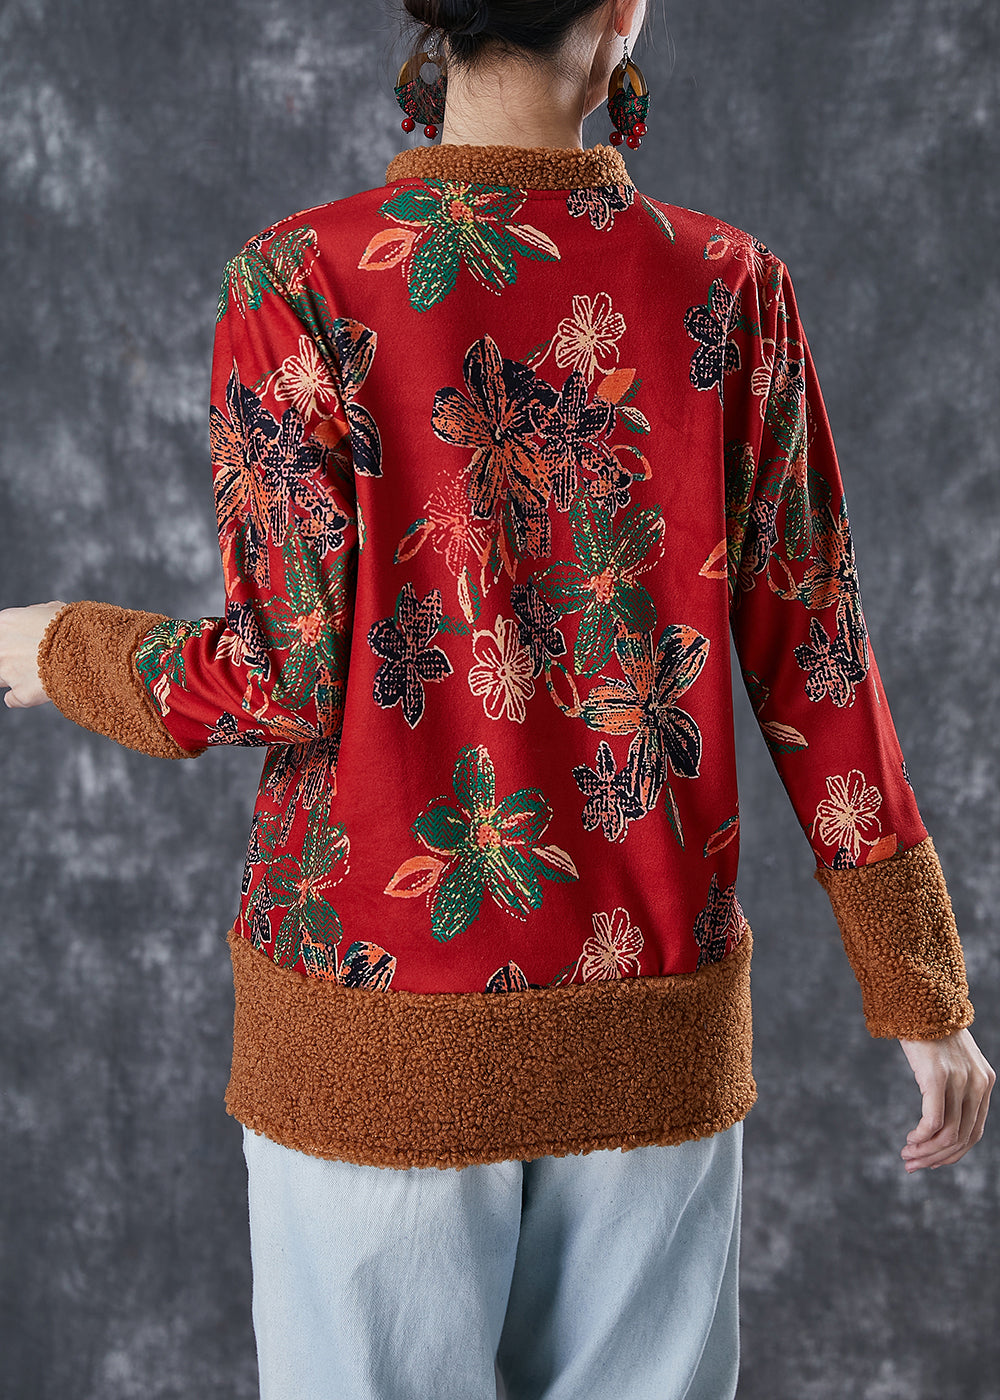 Red Patchwork Warm Fleece Jackets Chinese Button Winter